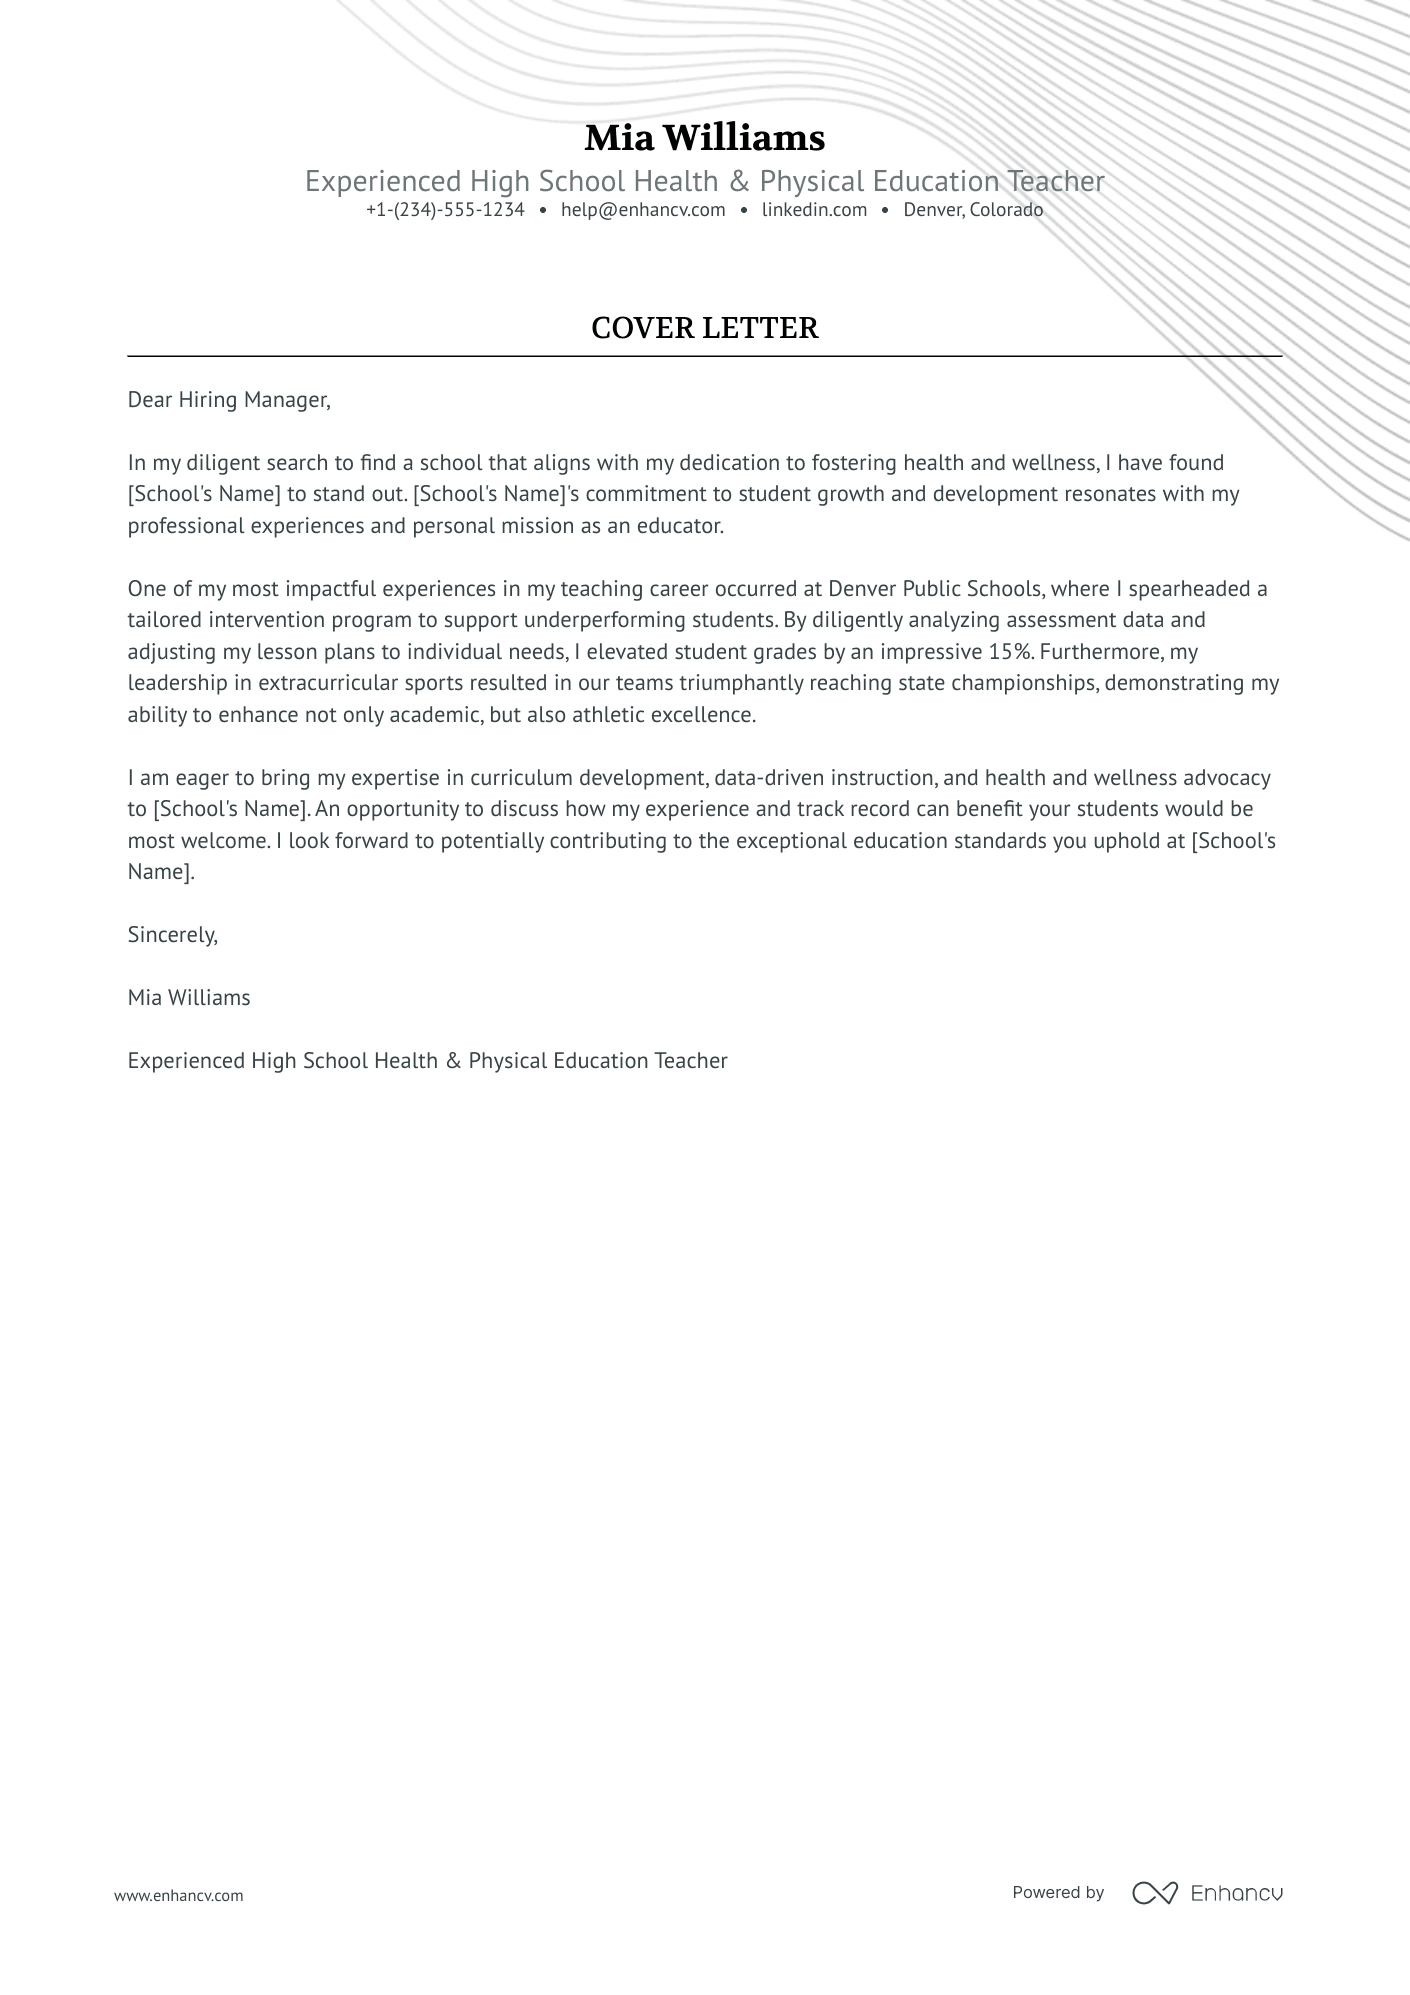 cover letter for physical education teacher with no experience